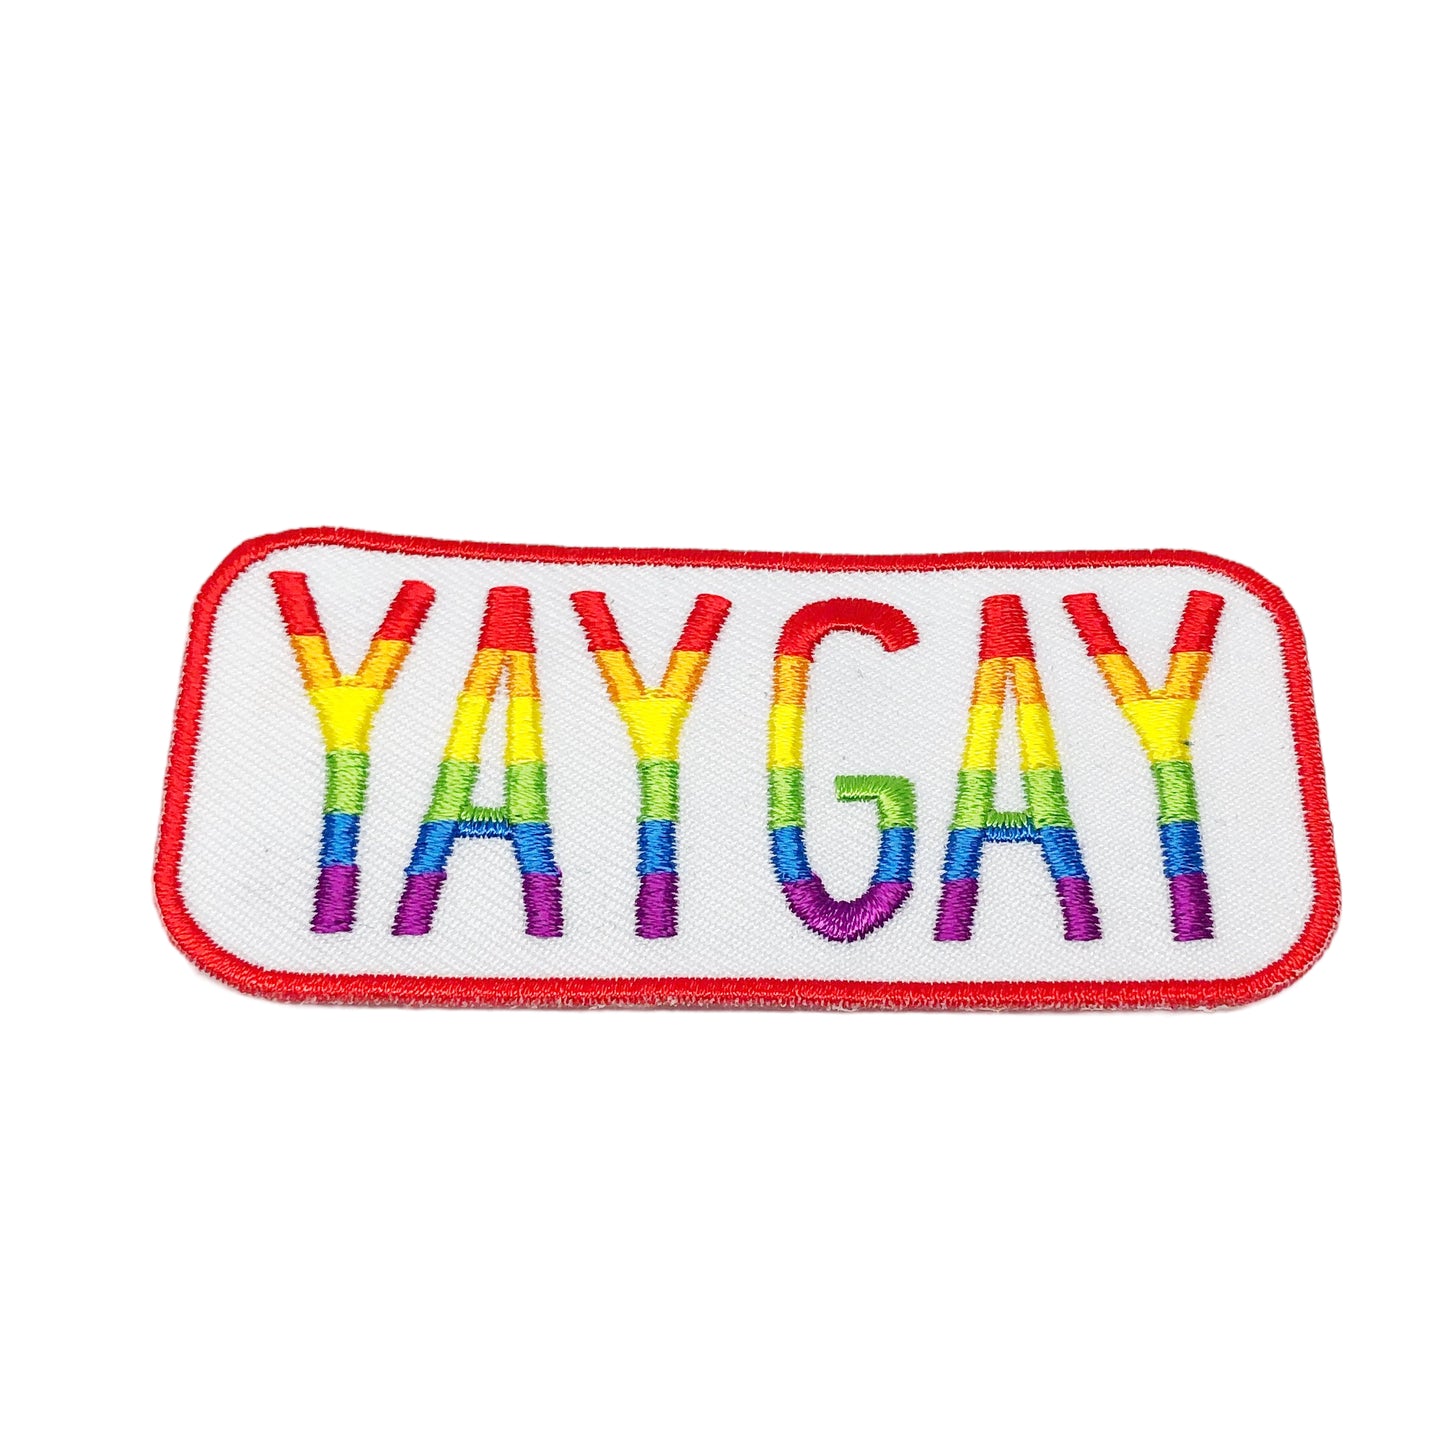 Yay Gay Signature Patch